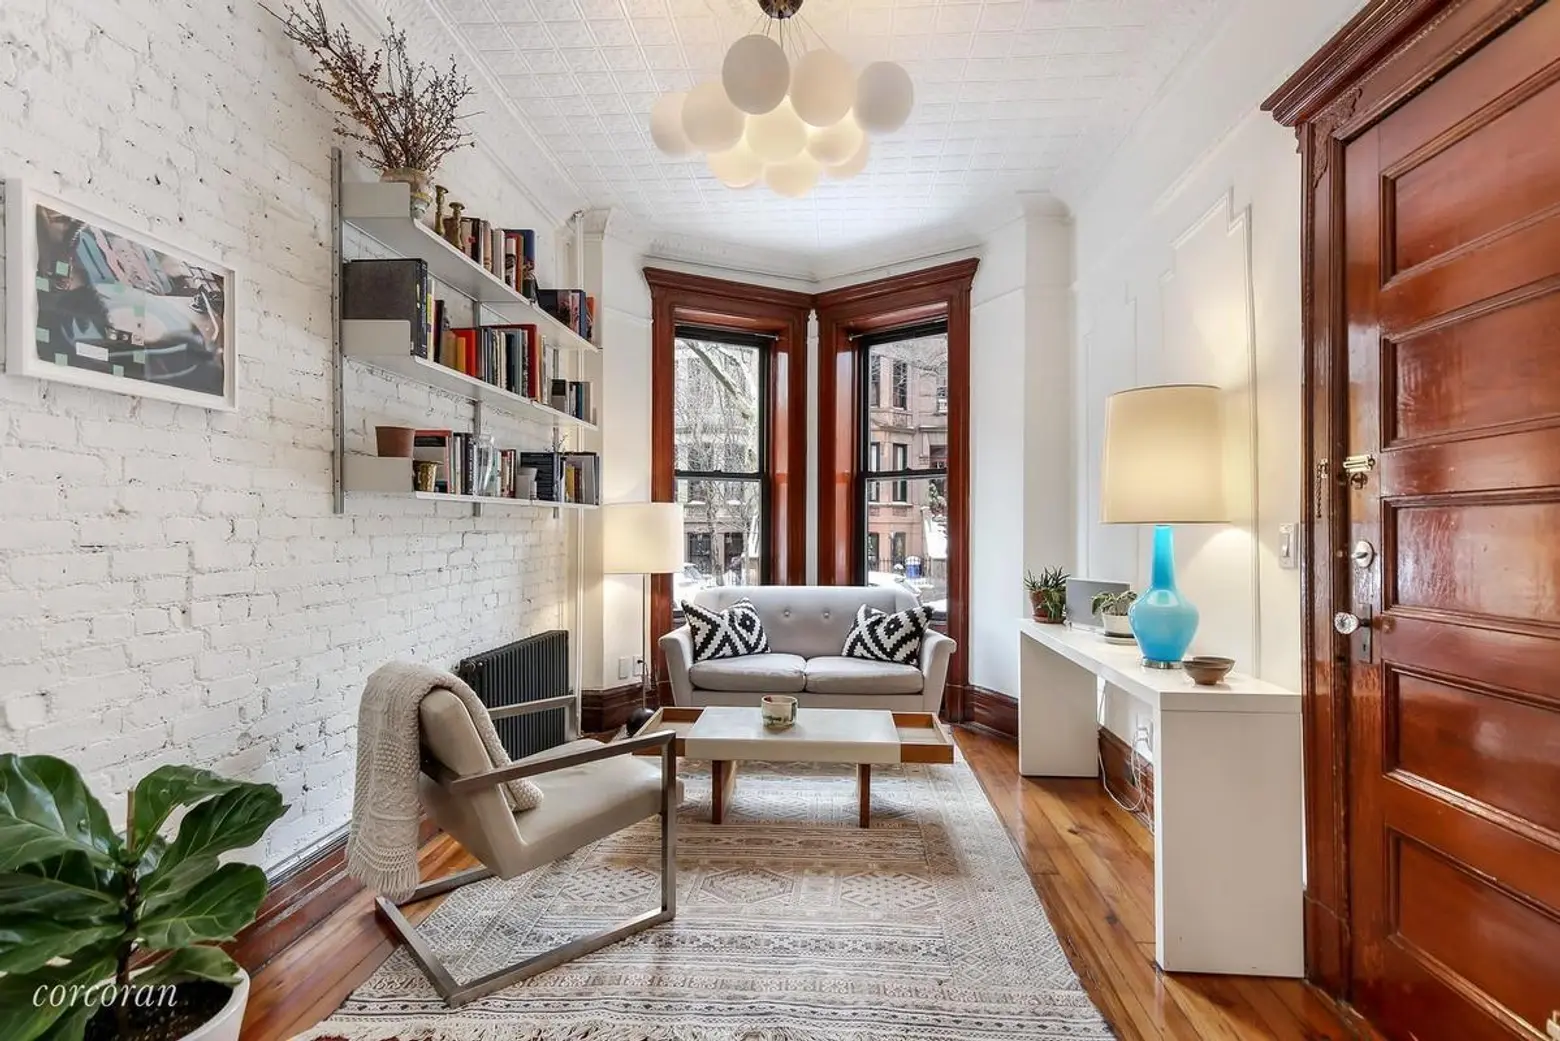 For $1.3M, this South Slope duplex has lots of options and a private patio